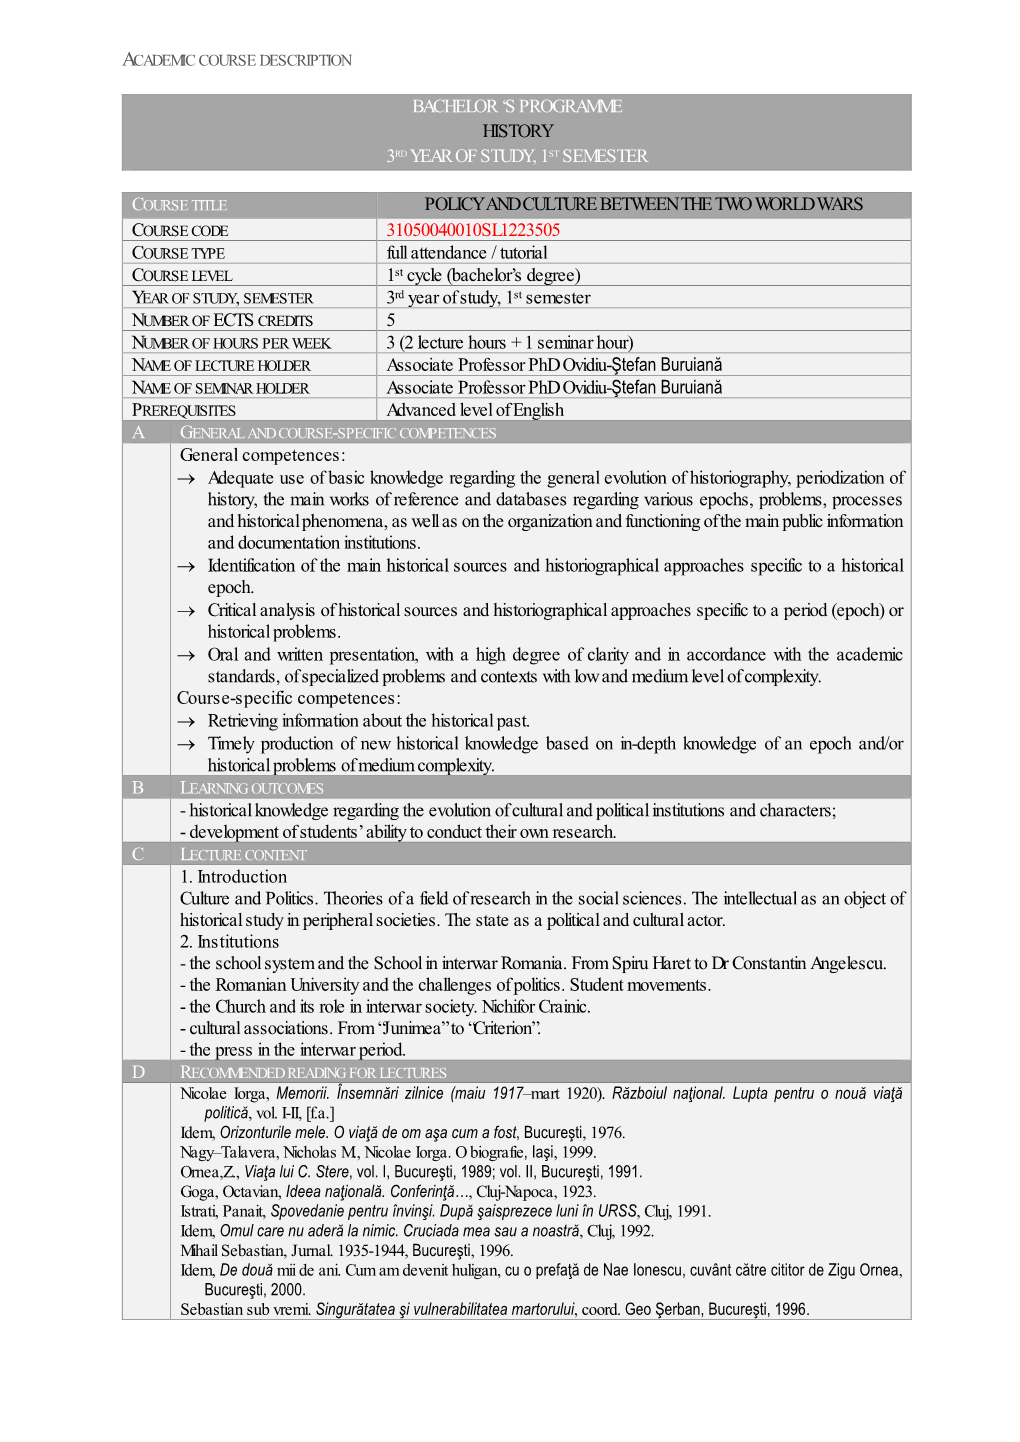 Bachelor 'S Programme History 3Rd Year of Study, 1